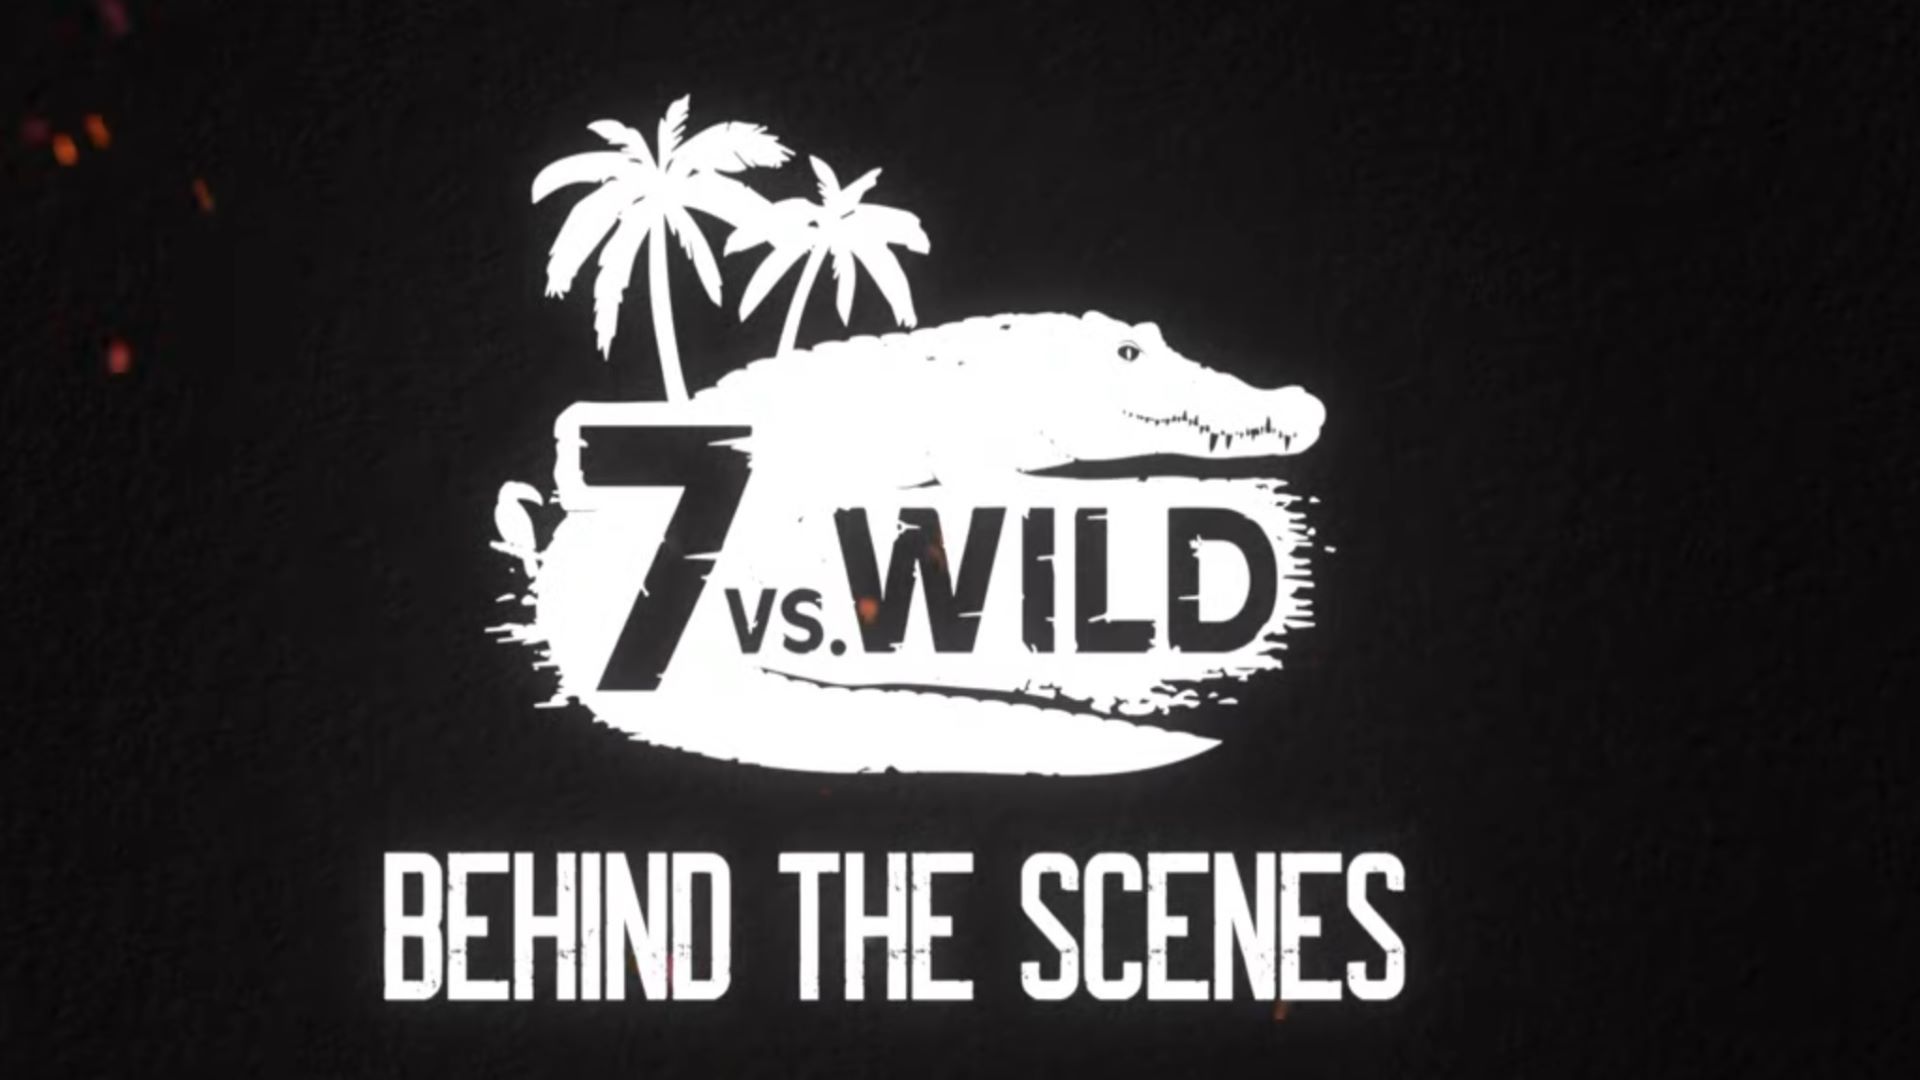 7 vs. Wild confronts us with a grim truth